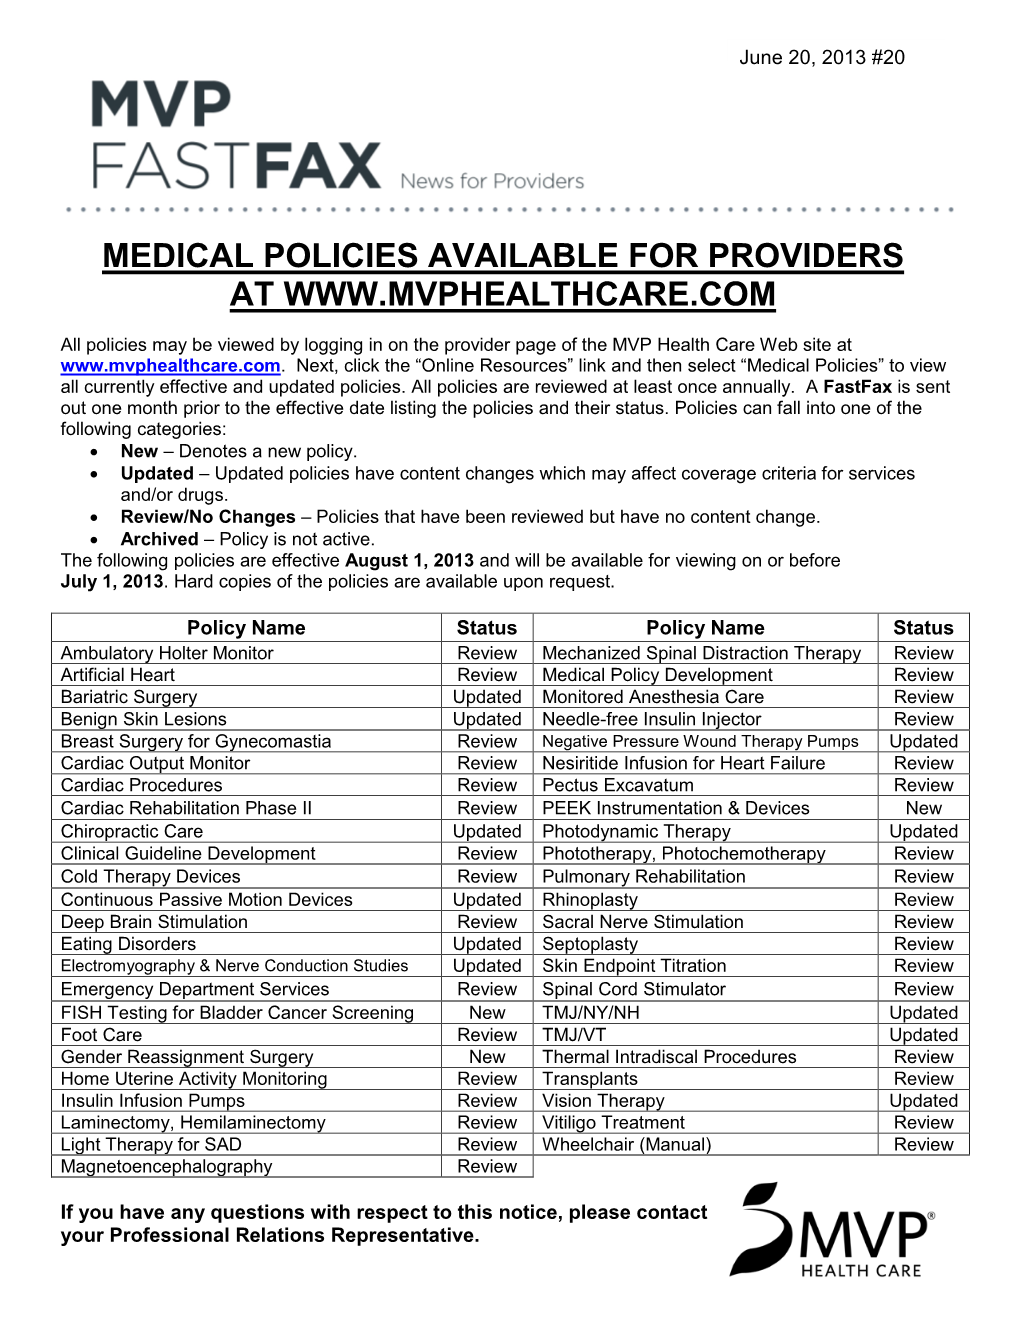 MVP Fastfax East #20: Medical Policies Available for Providers